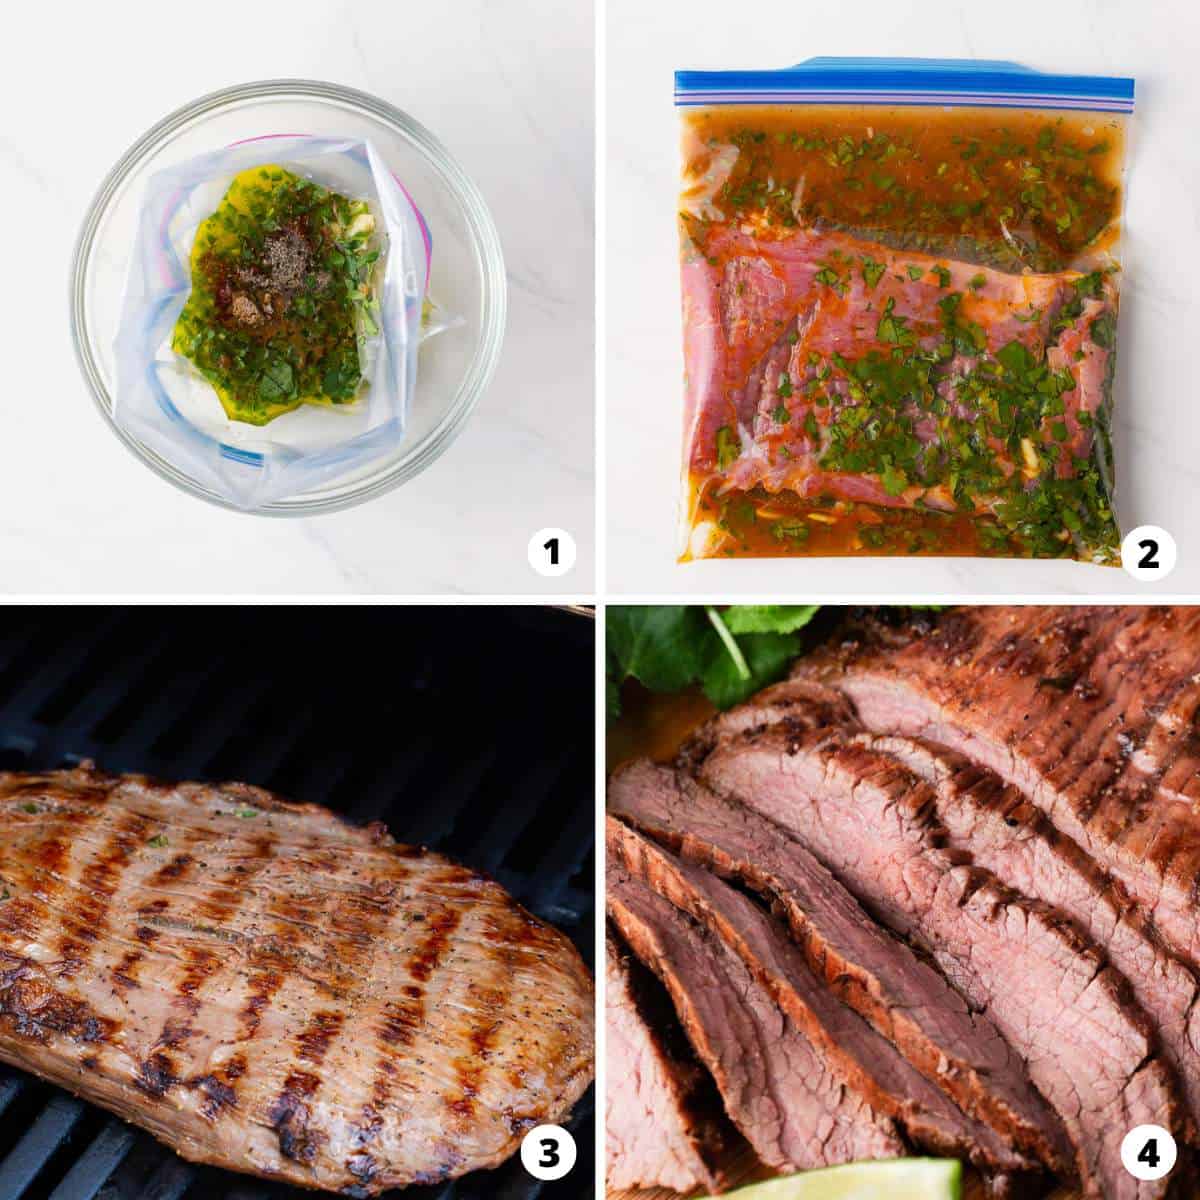 Showing how to make carne asada in a 4 step collage.